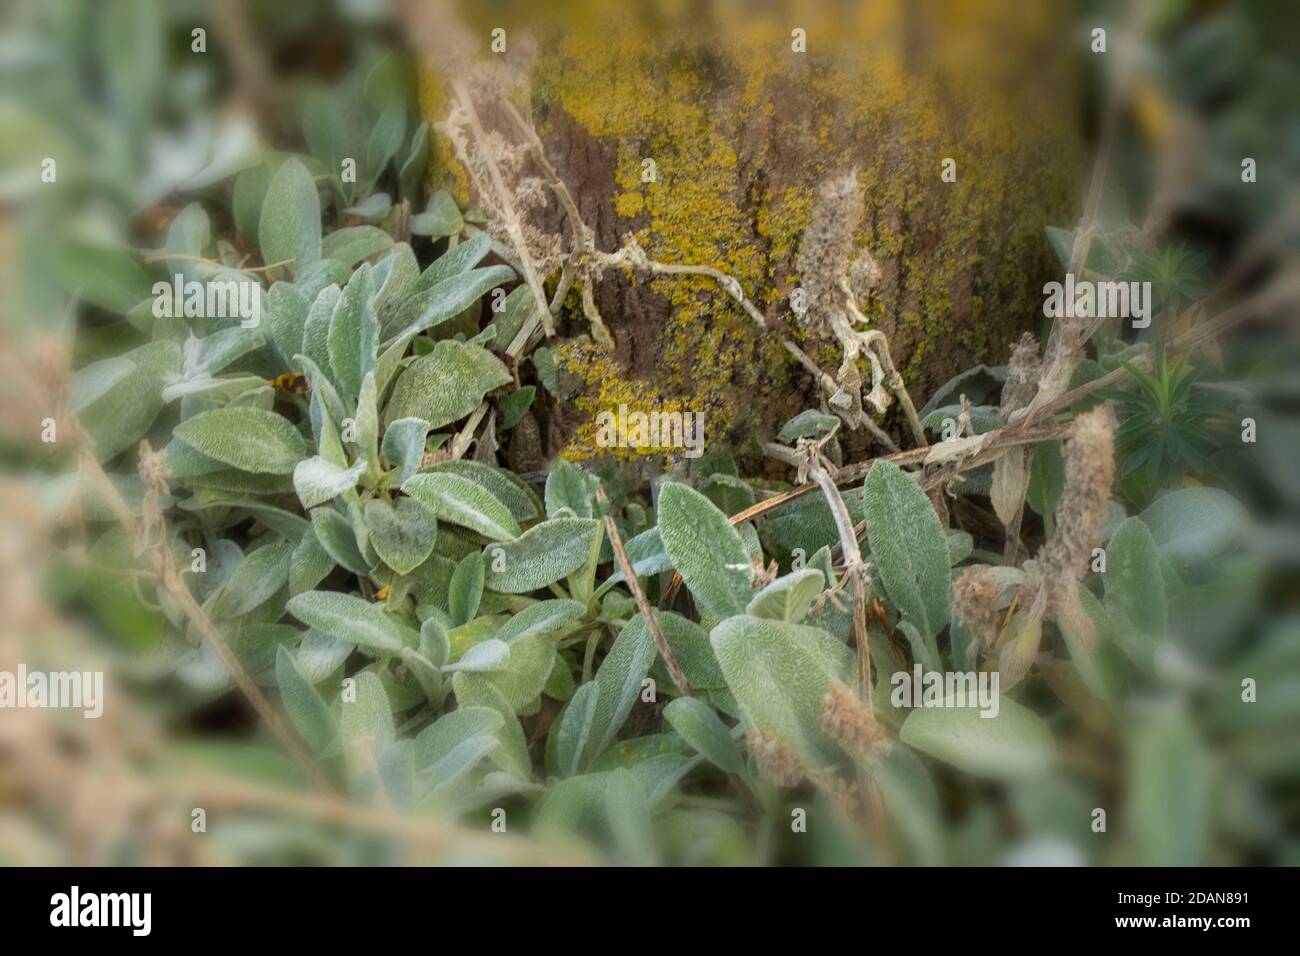 Stachys byzantine, lamb's-ear, close-up abstract of ground cover plants as natural patterns and texture Stock Photo